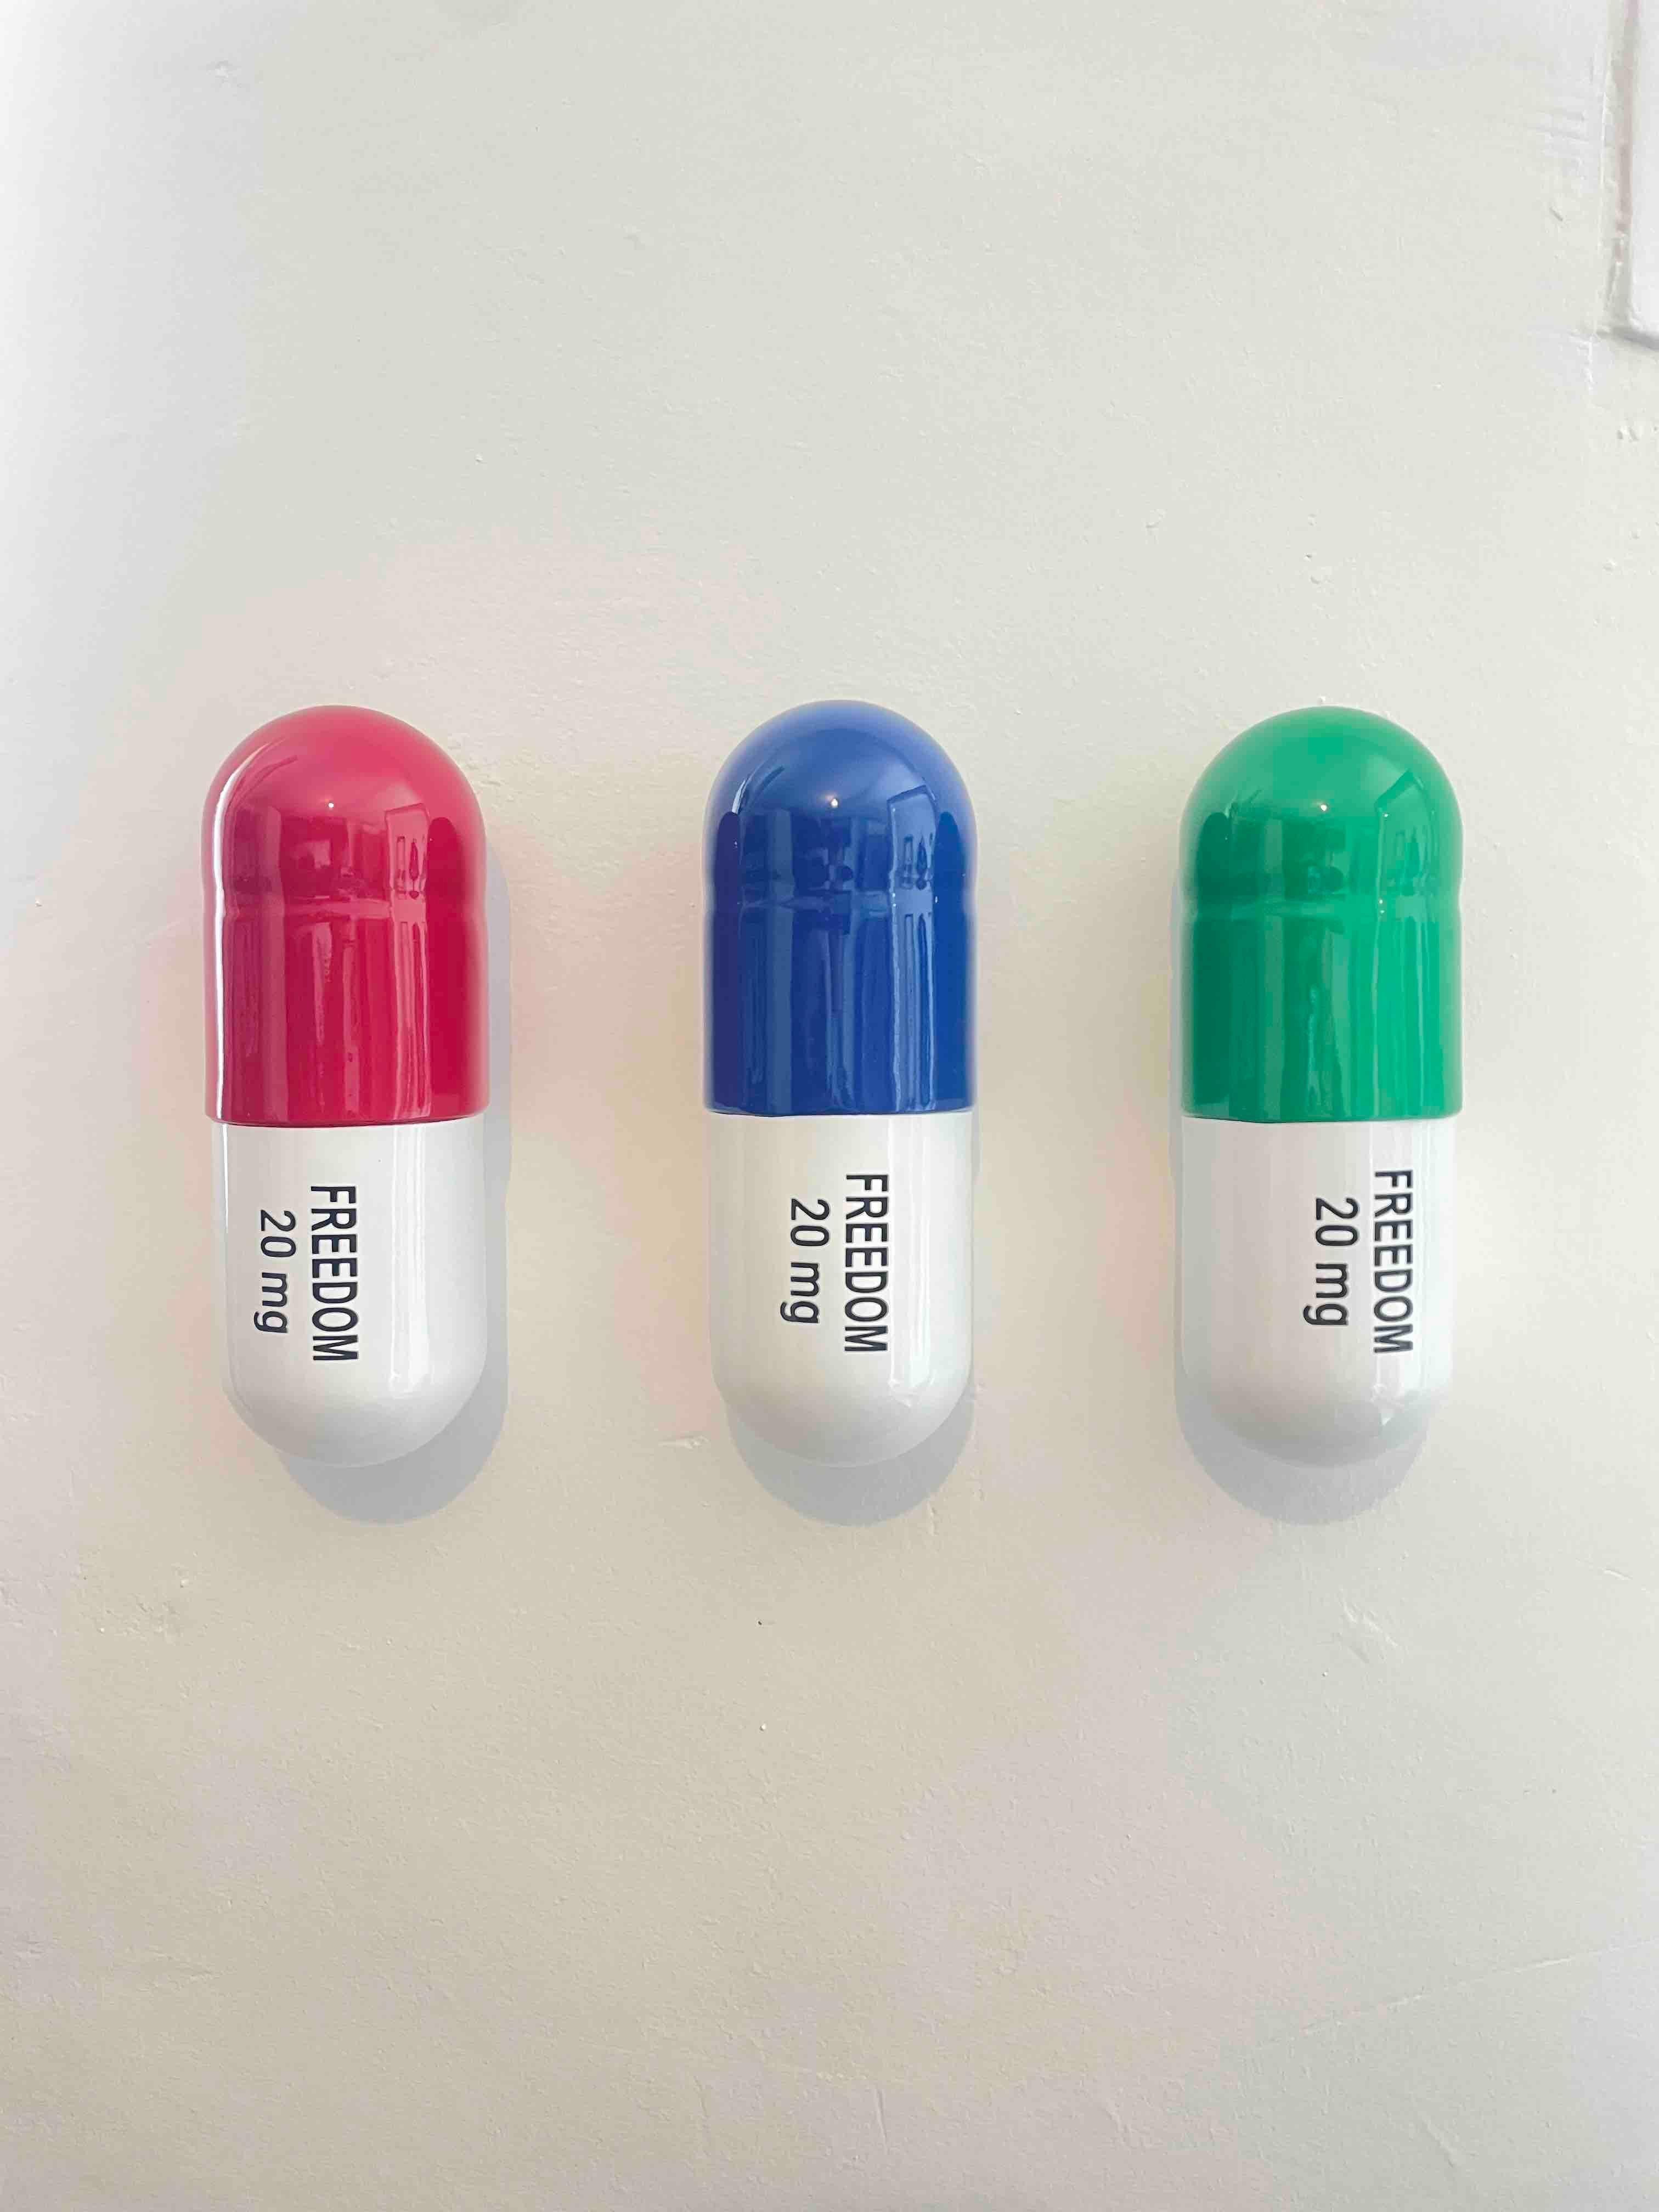 20 MG Freedom pill Combo (blue, green and red) - figurative sculpture - Sculpture by Tal Nehoray